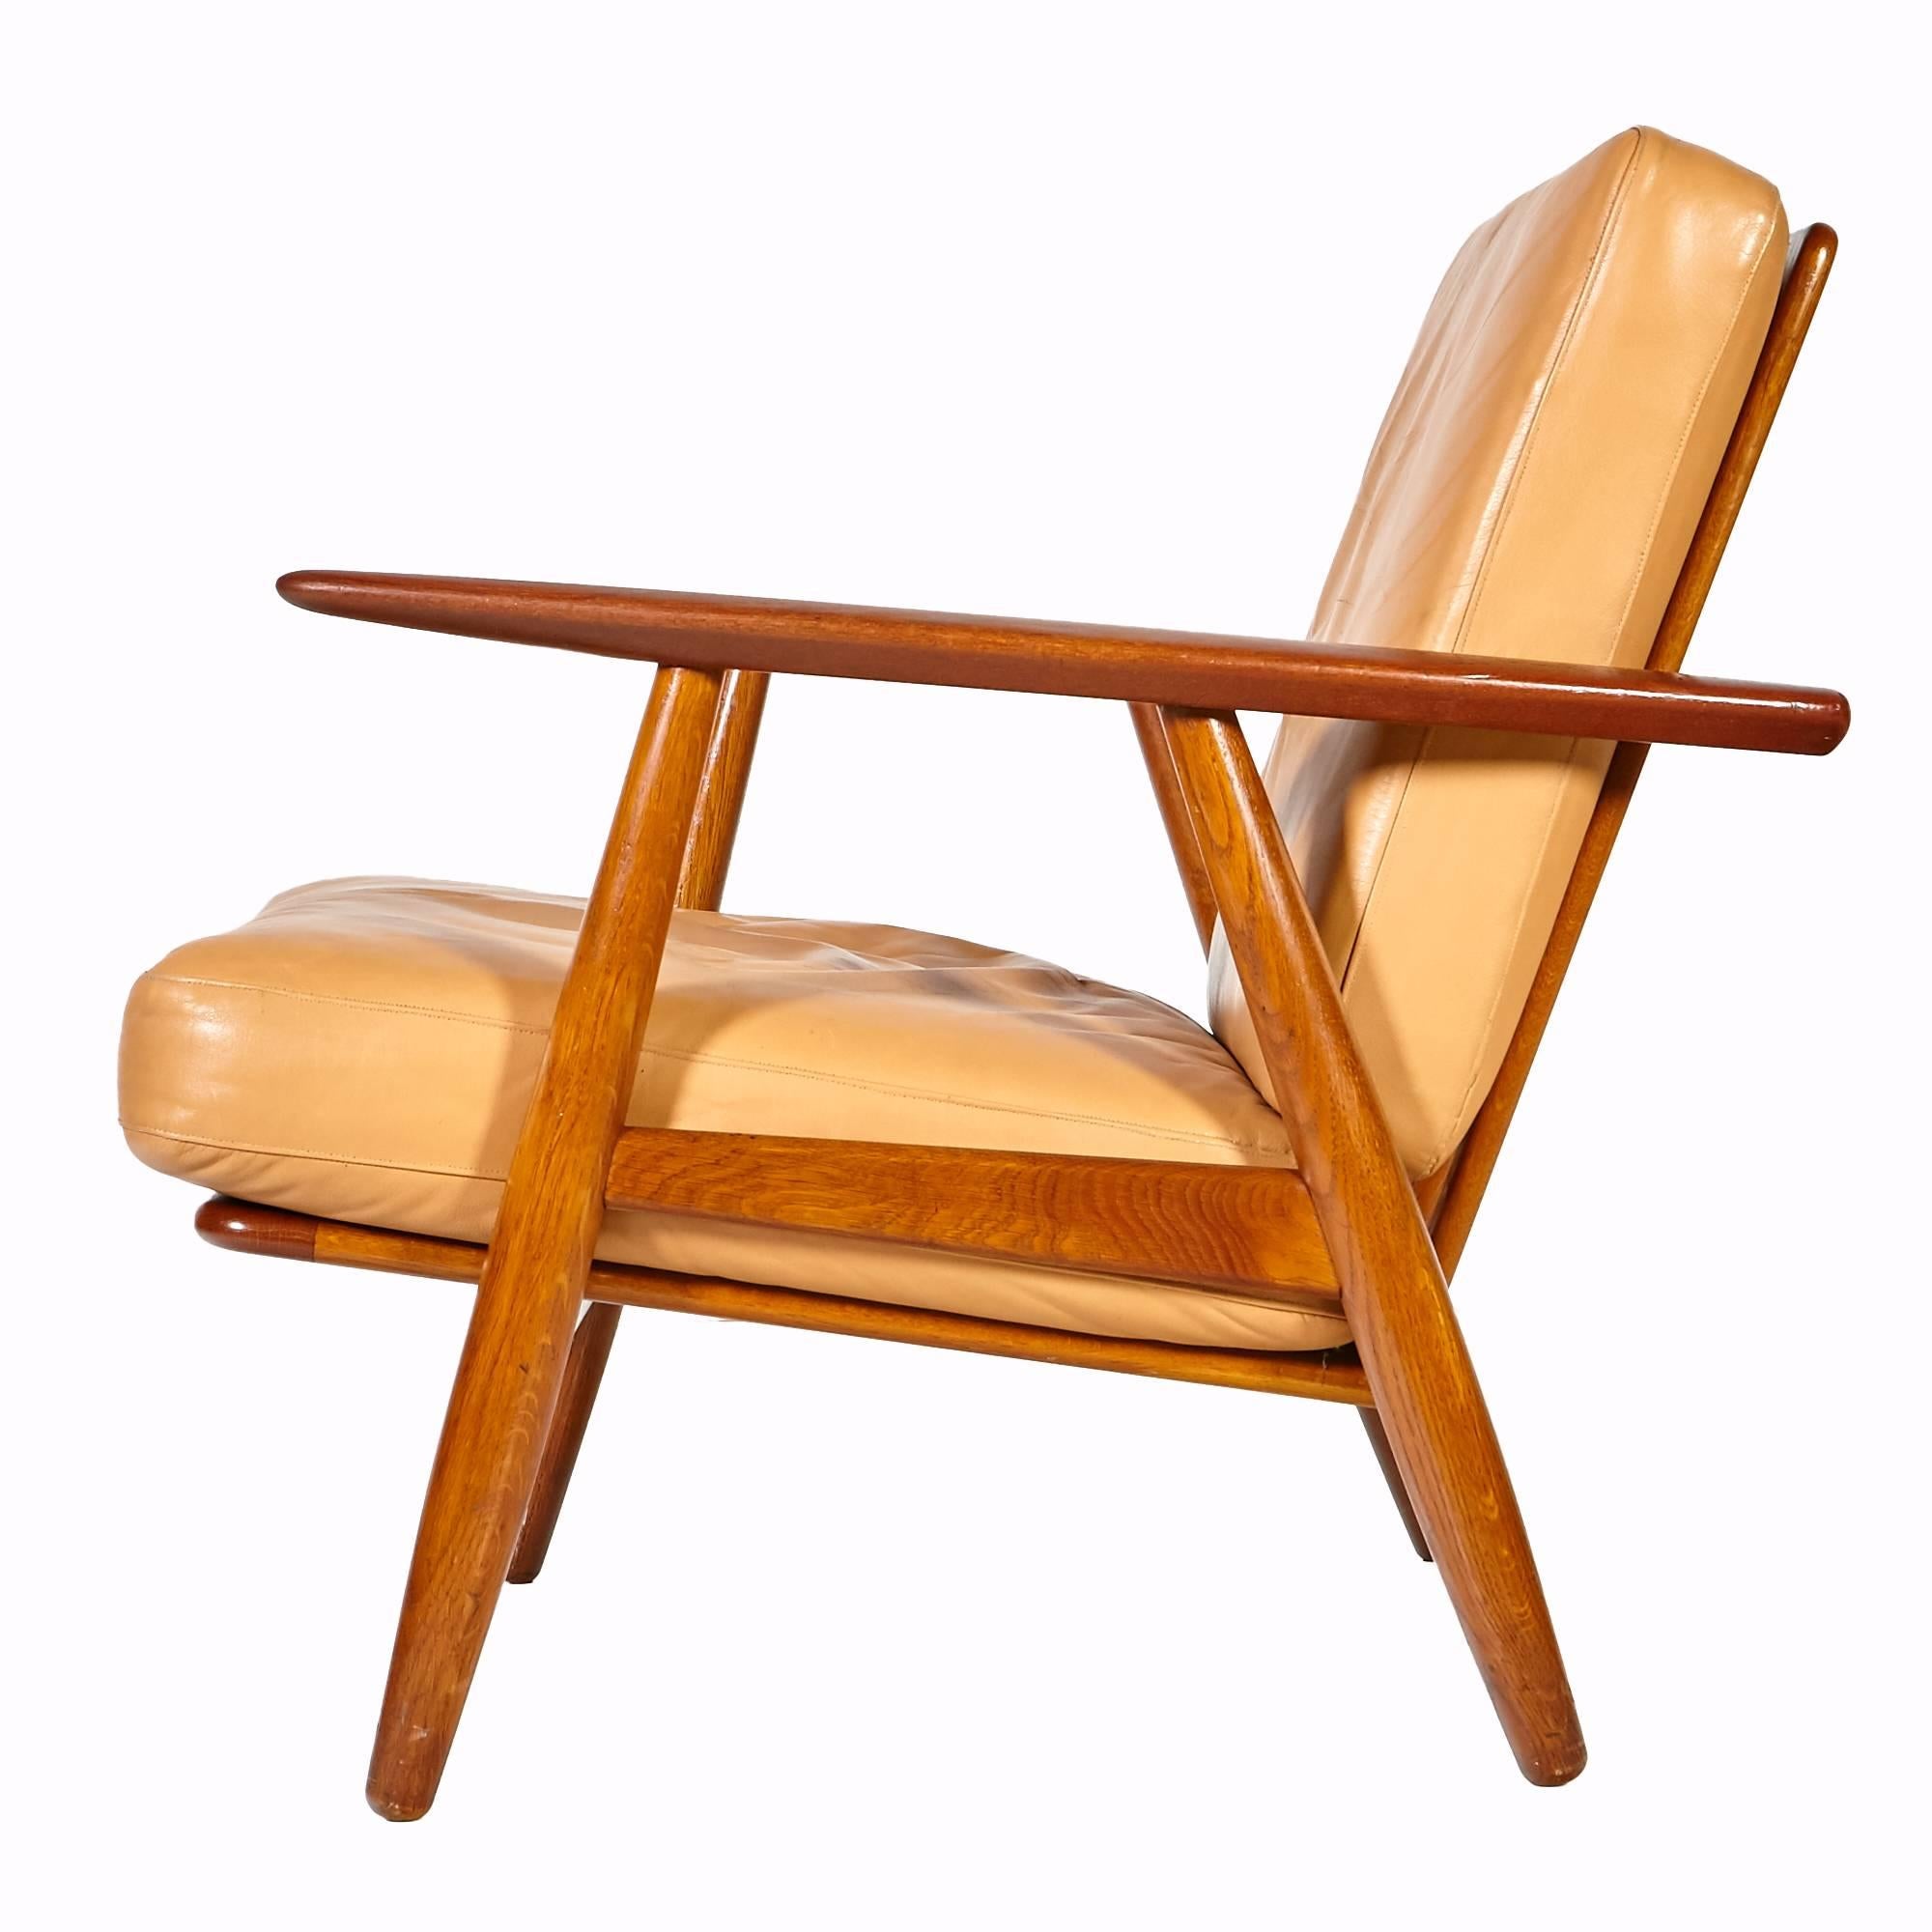 1955 Danish teak GE-240 lounge chair designed by Hans J. Wegner and manufactured by Getama of Denmark. Comes with the original butterscotch leather upholstery. Marked on the underside. Minor wear to the leather from use.